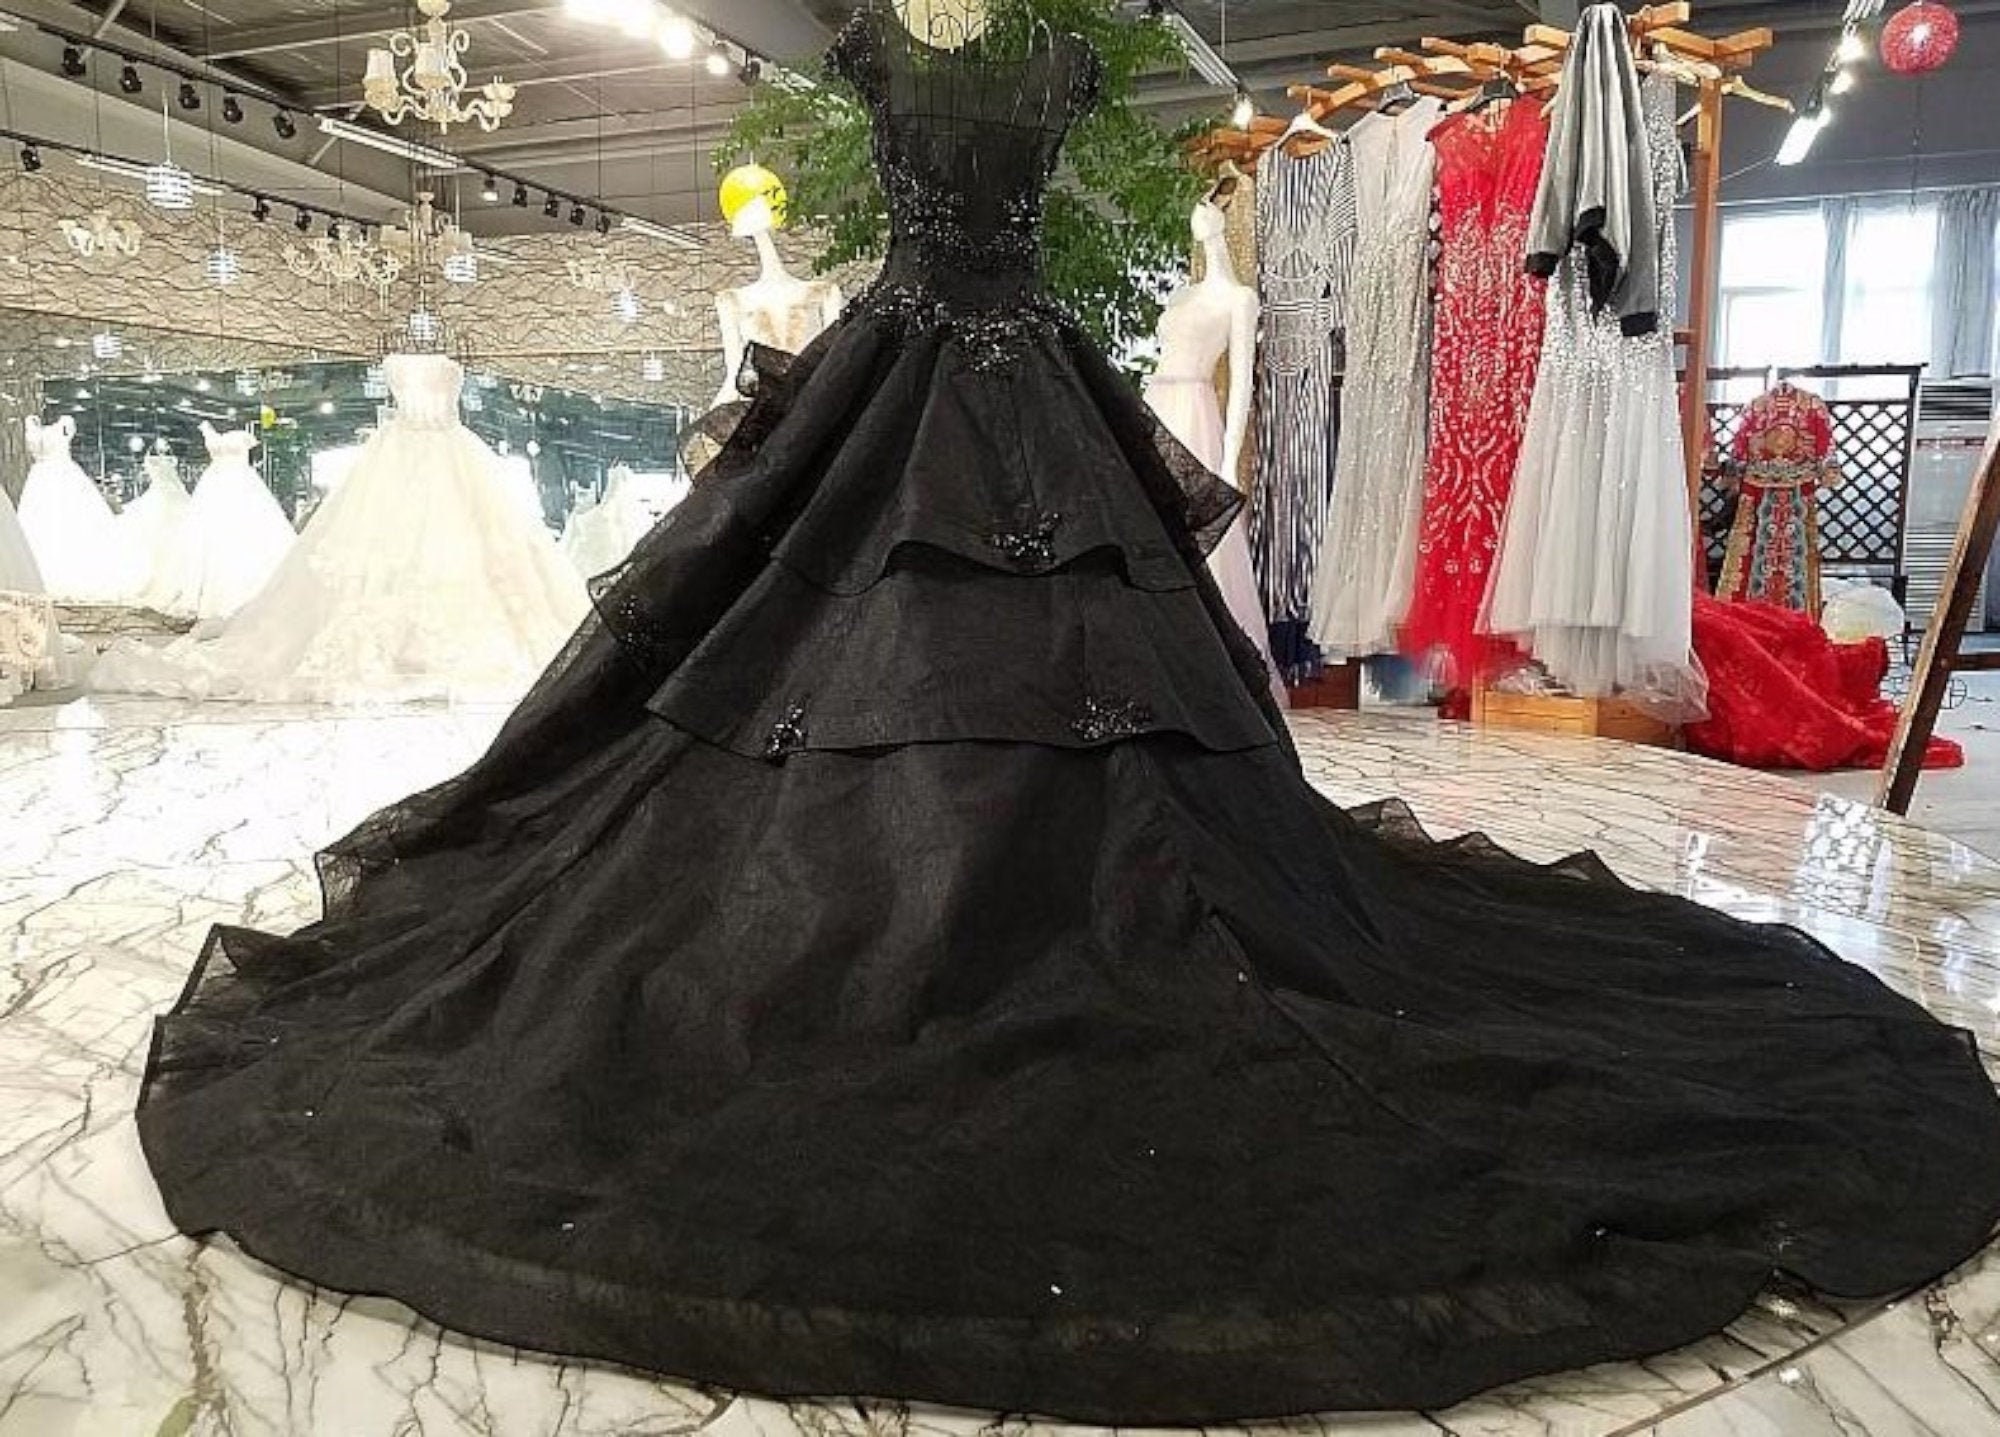 Dramatic Deluxe Black Victorian Gothic Court Wedding Ball Gown | Etsy